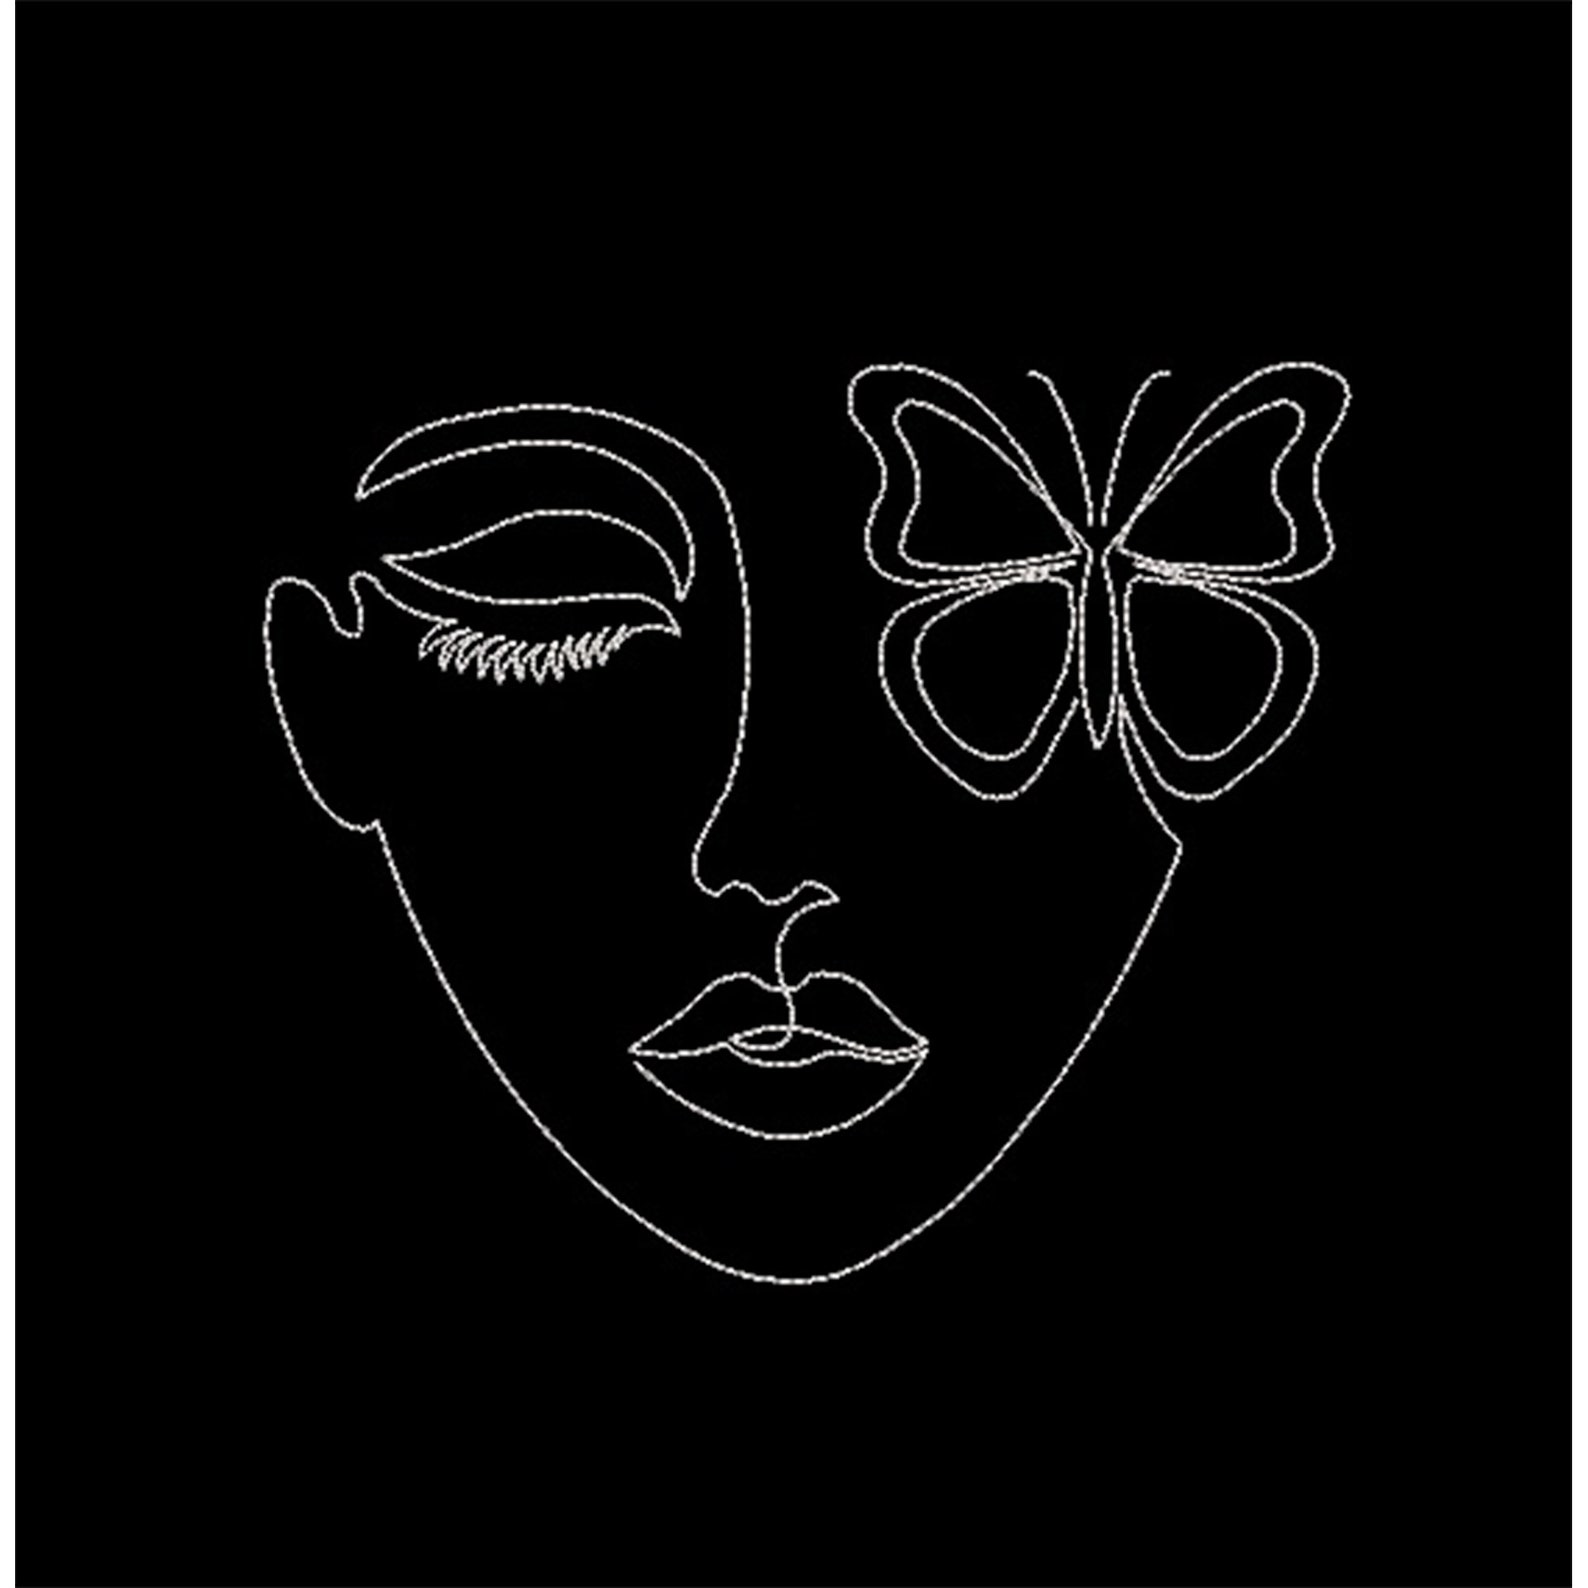 Face Woman Embroidery Design Embroidery Pattern Of A Woman Etsy